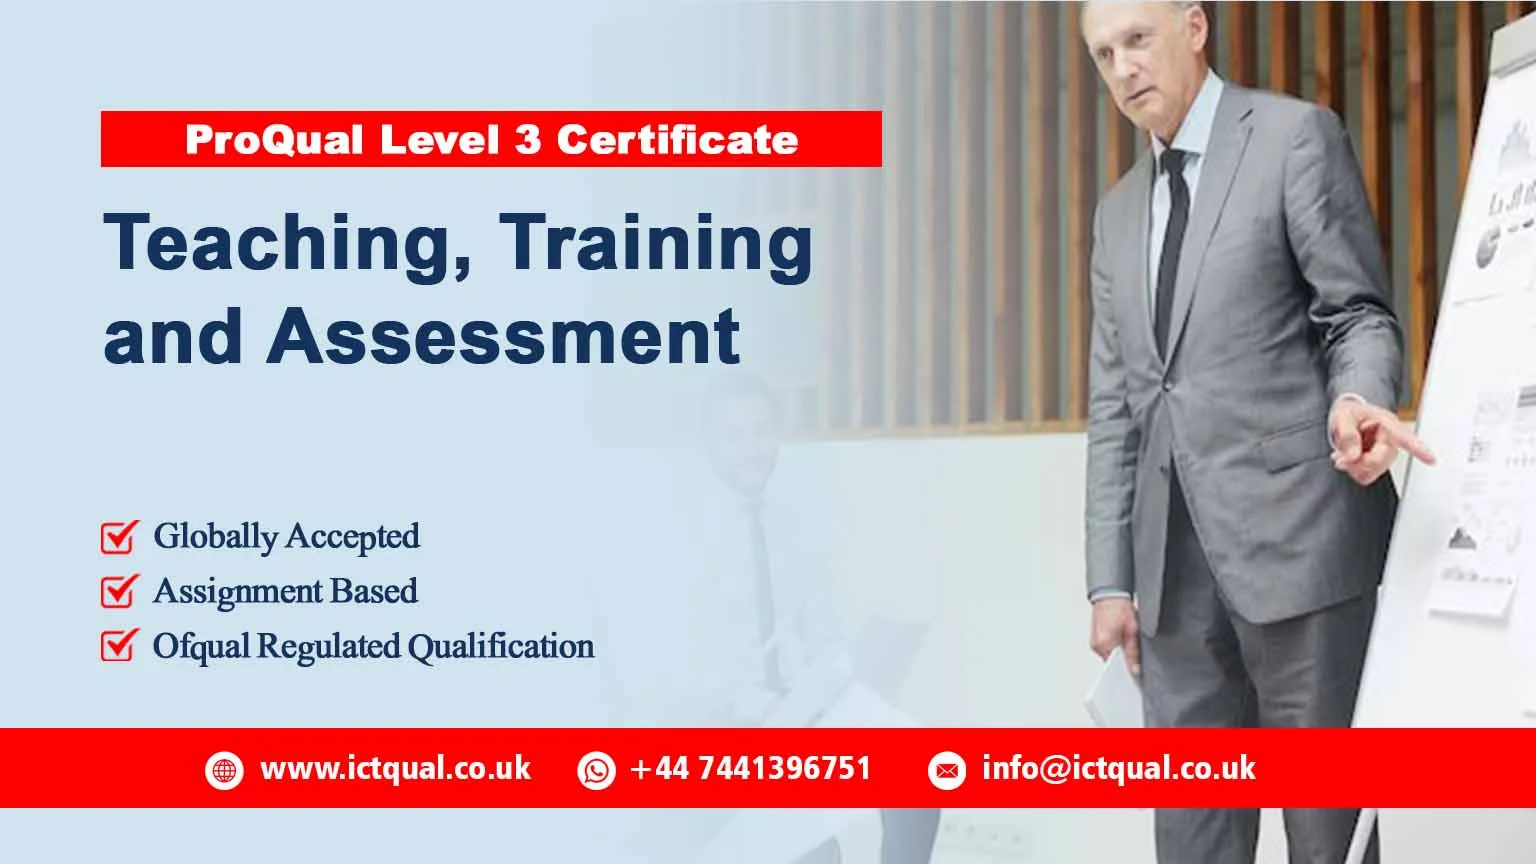 ProQual Level 3 Certificate in Teaching, Training and Assessment